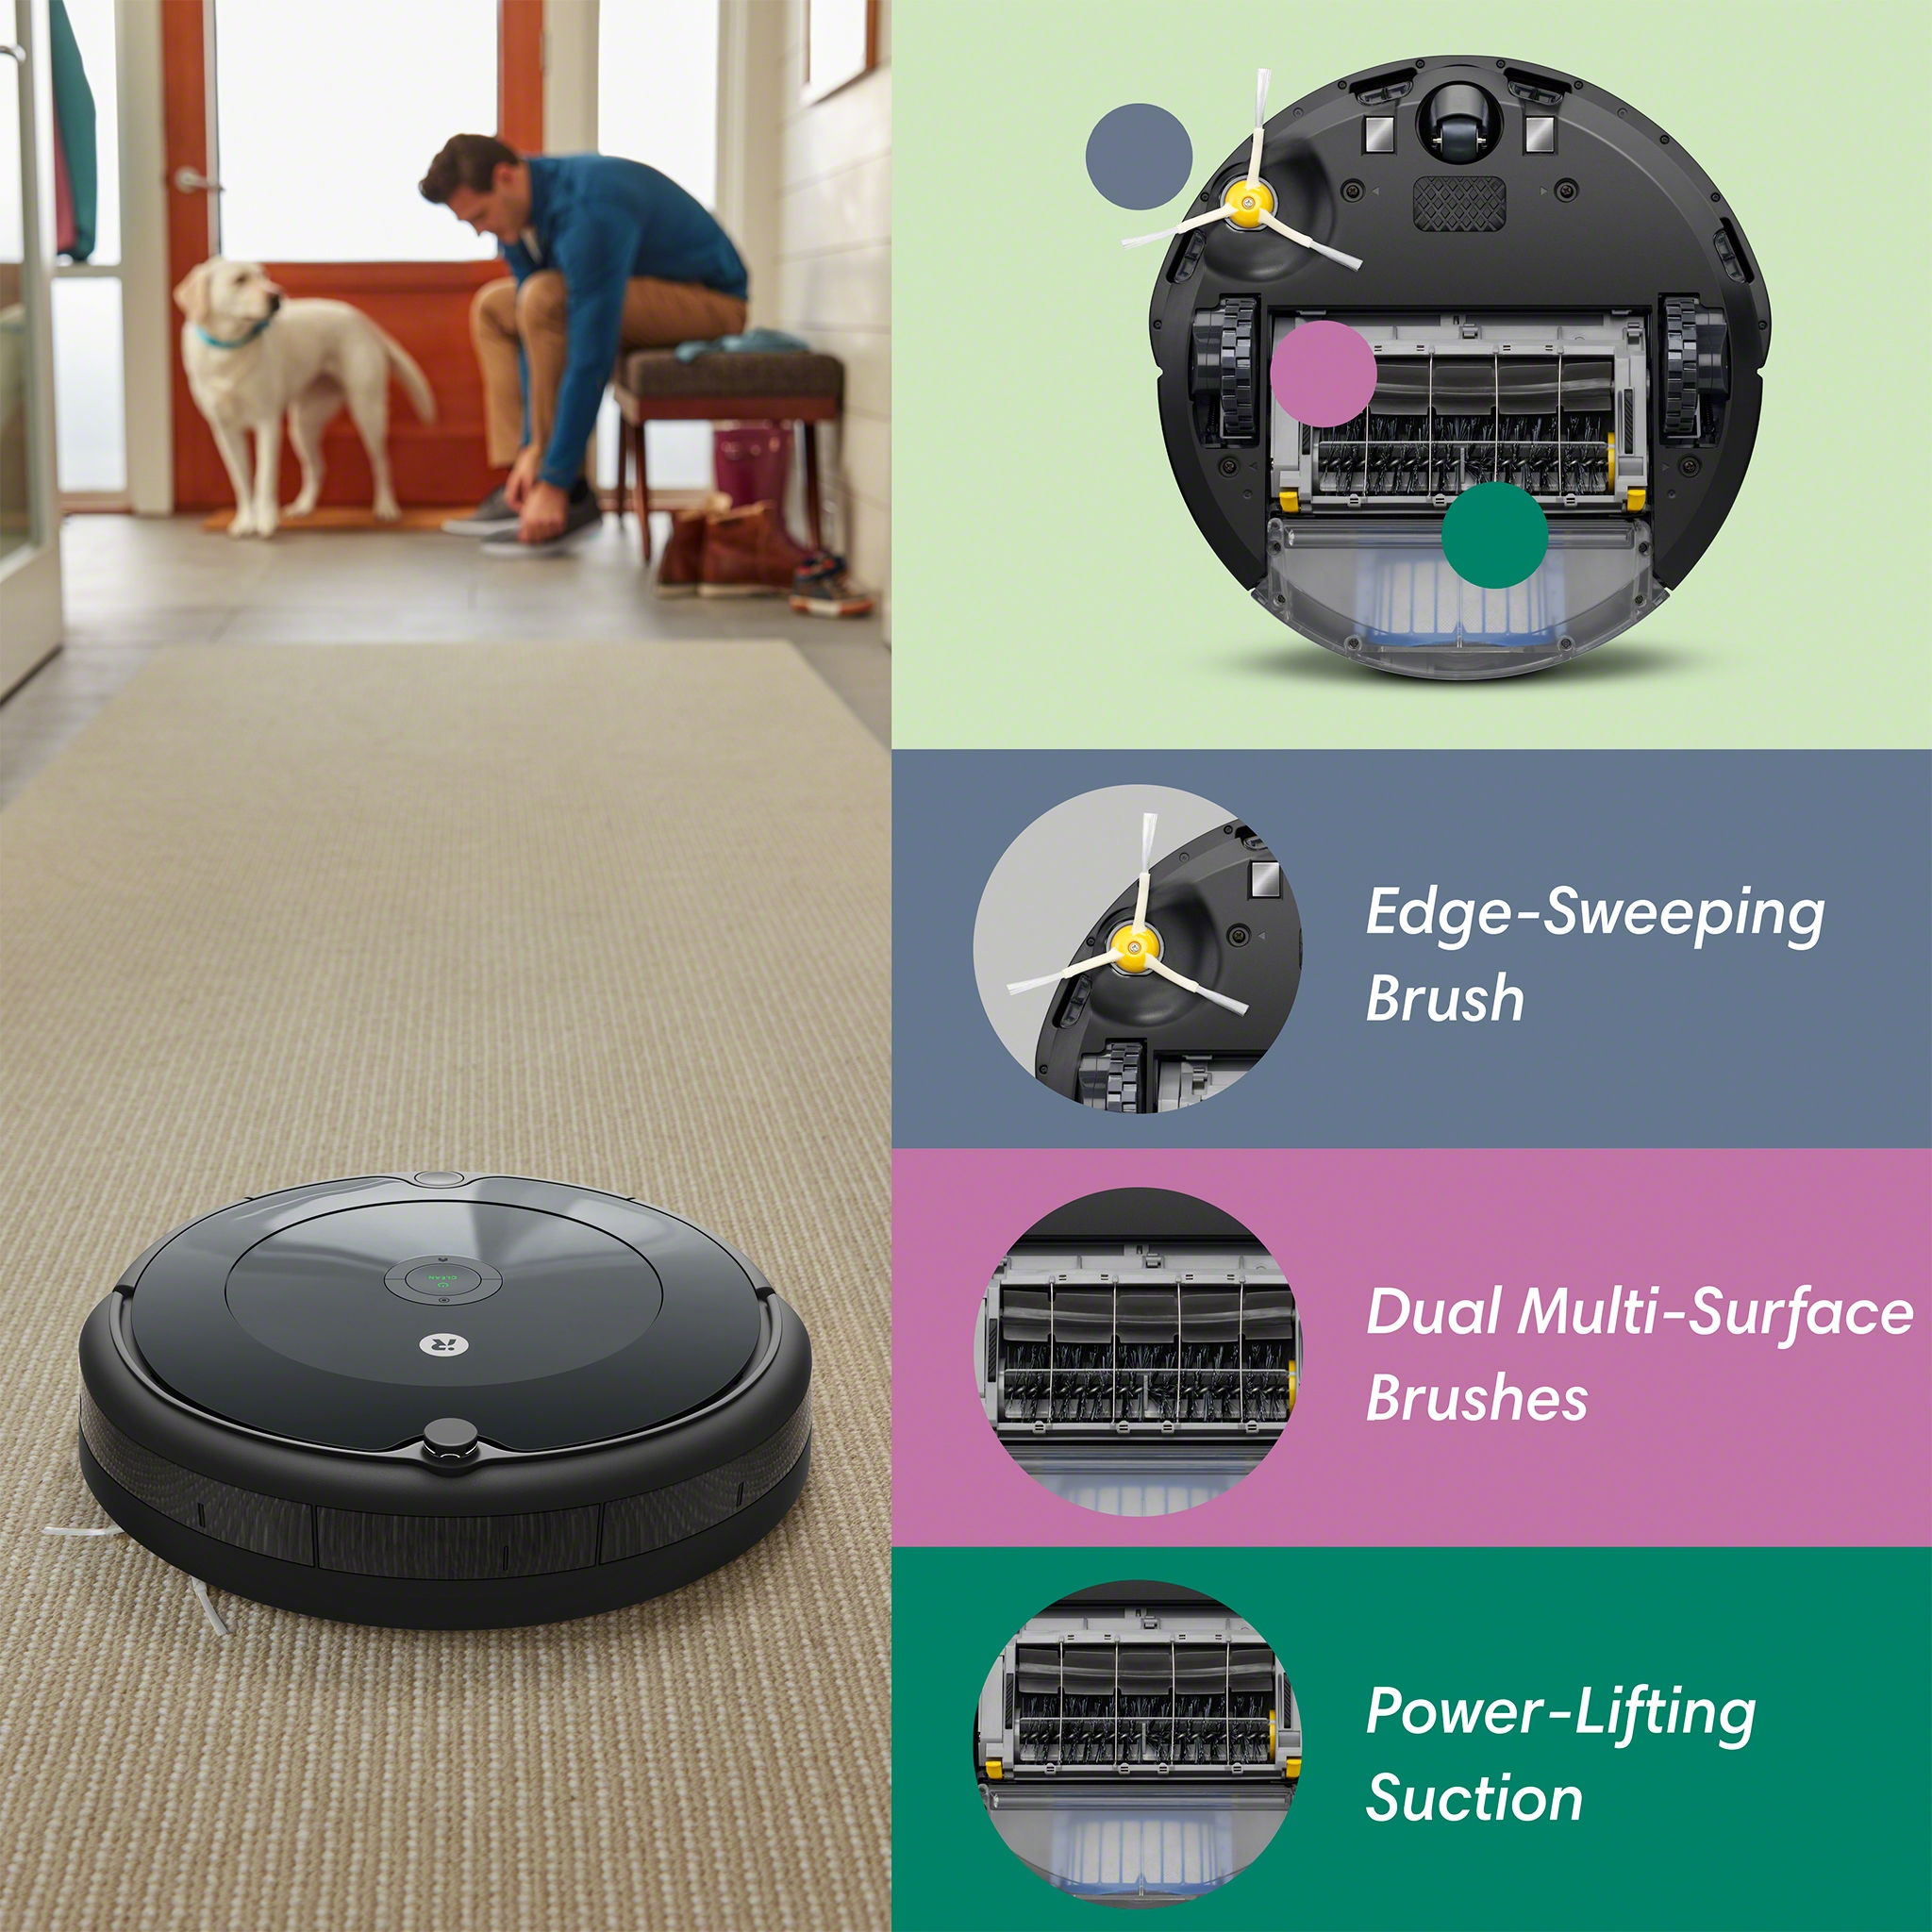 iRobot® Roomba® 676 Robot Vacuum-Wi-Fi Connectivity, Personalized Cleaning Recommendations, Works with Google, Good for Pet Hair, Carpets, Hard Floors, Self-Charging - image 3 of 15